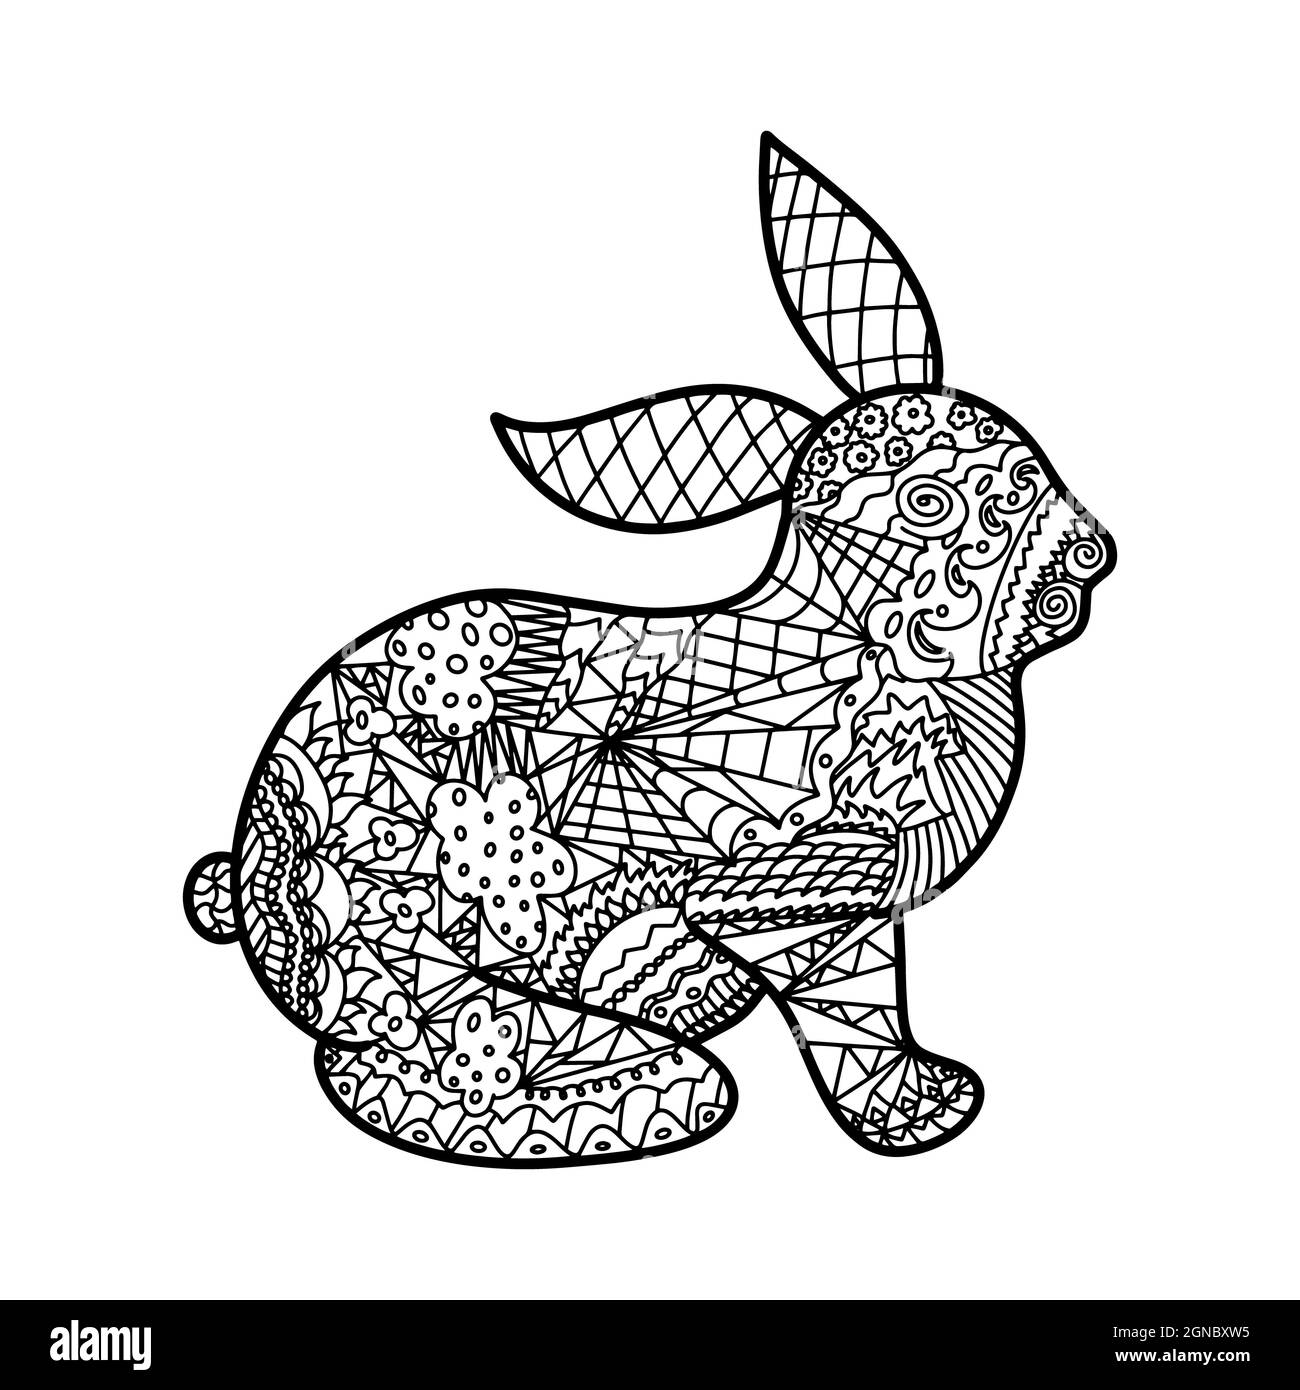 Hand drawn black hare rabbit colouring page illustration. Abstract easter bunny graphic pattern design for print animal tattoo greeting card zodiac Stock Photo